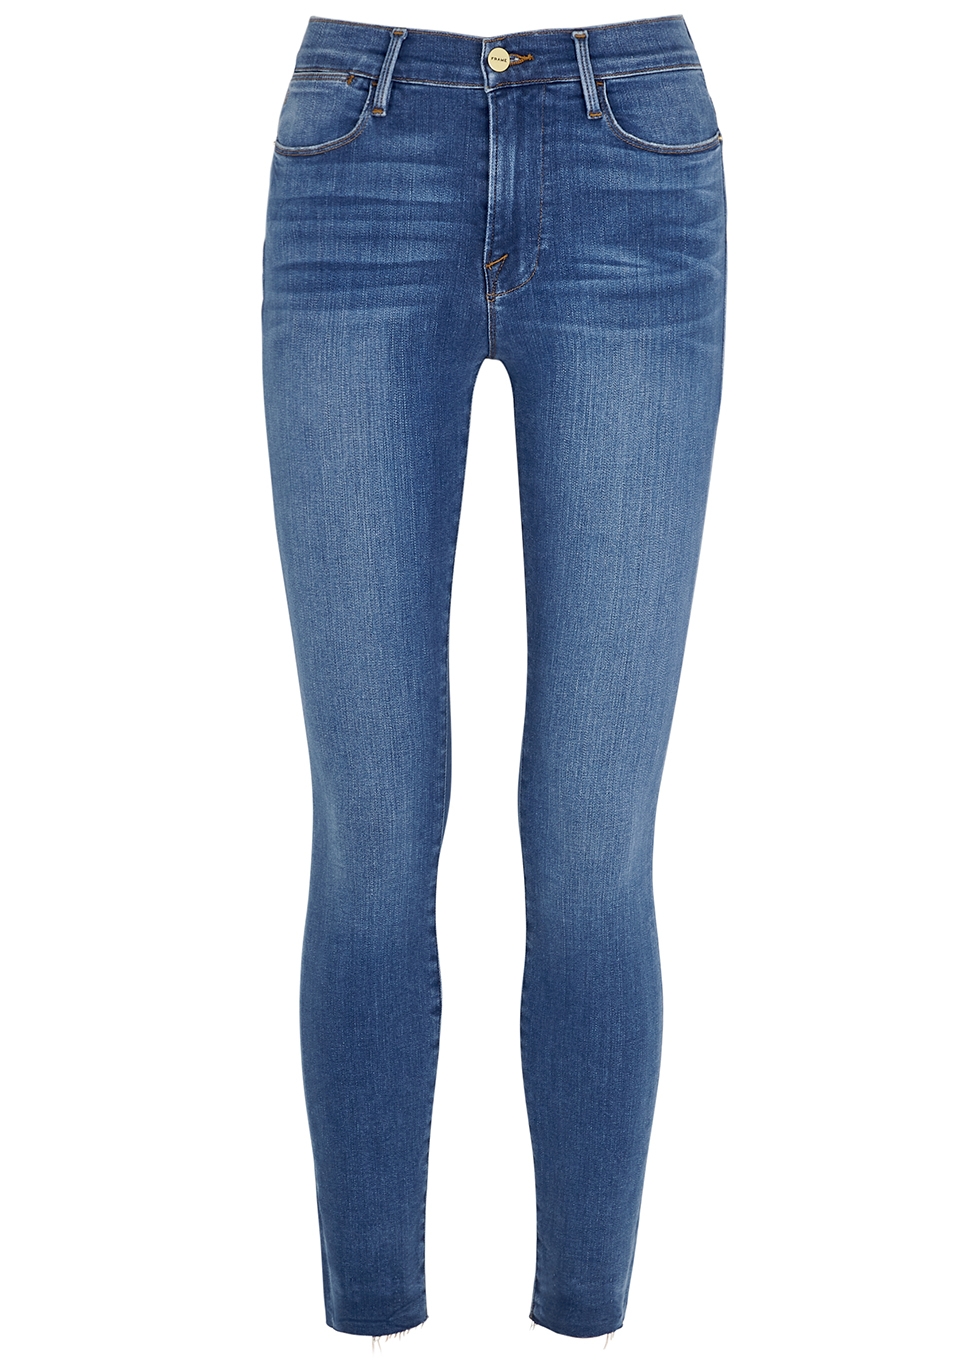 Le High Skinny blue jeans